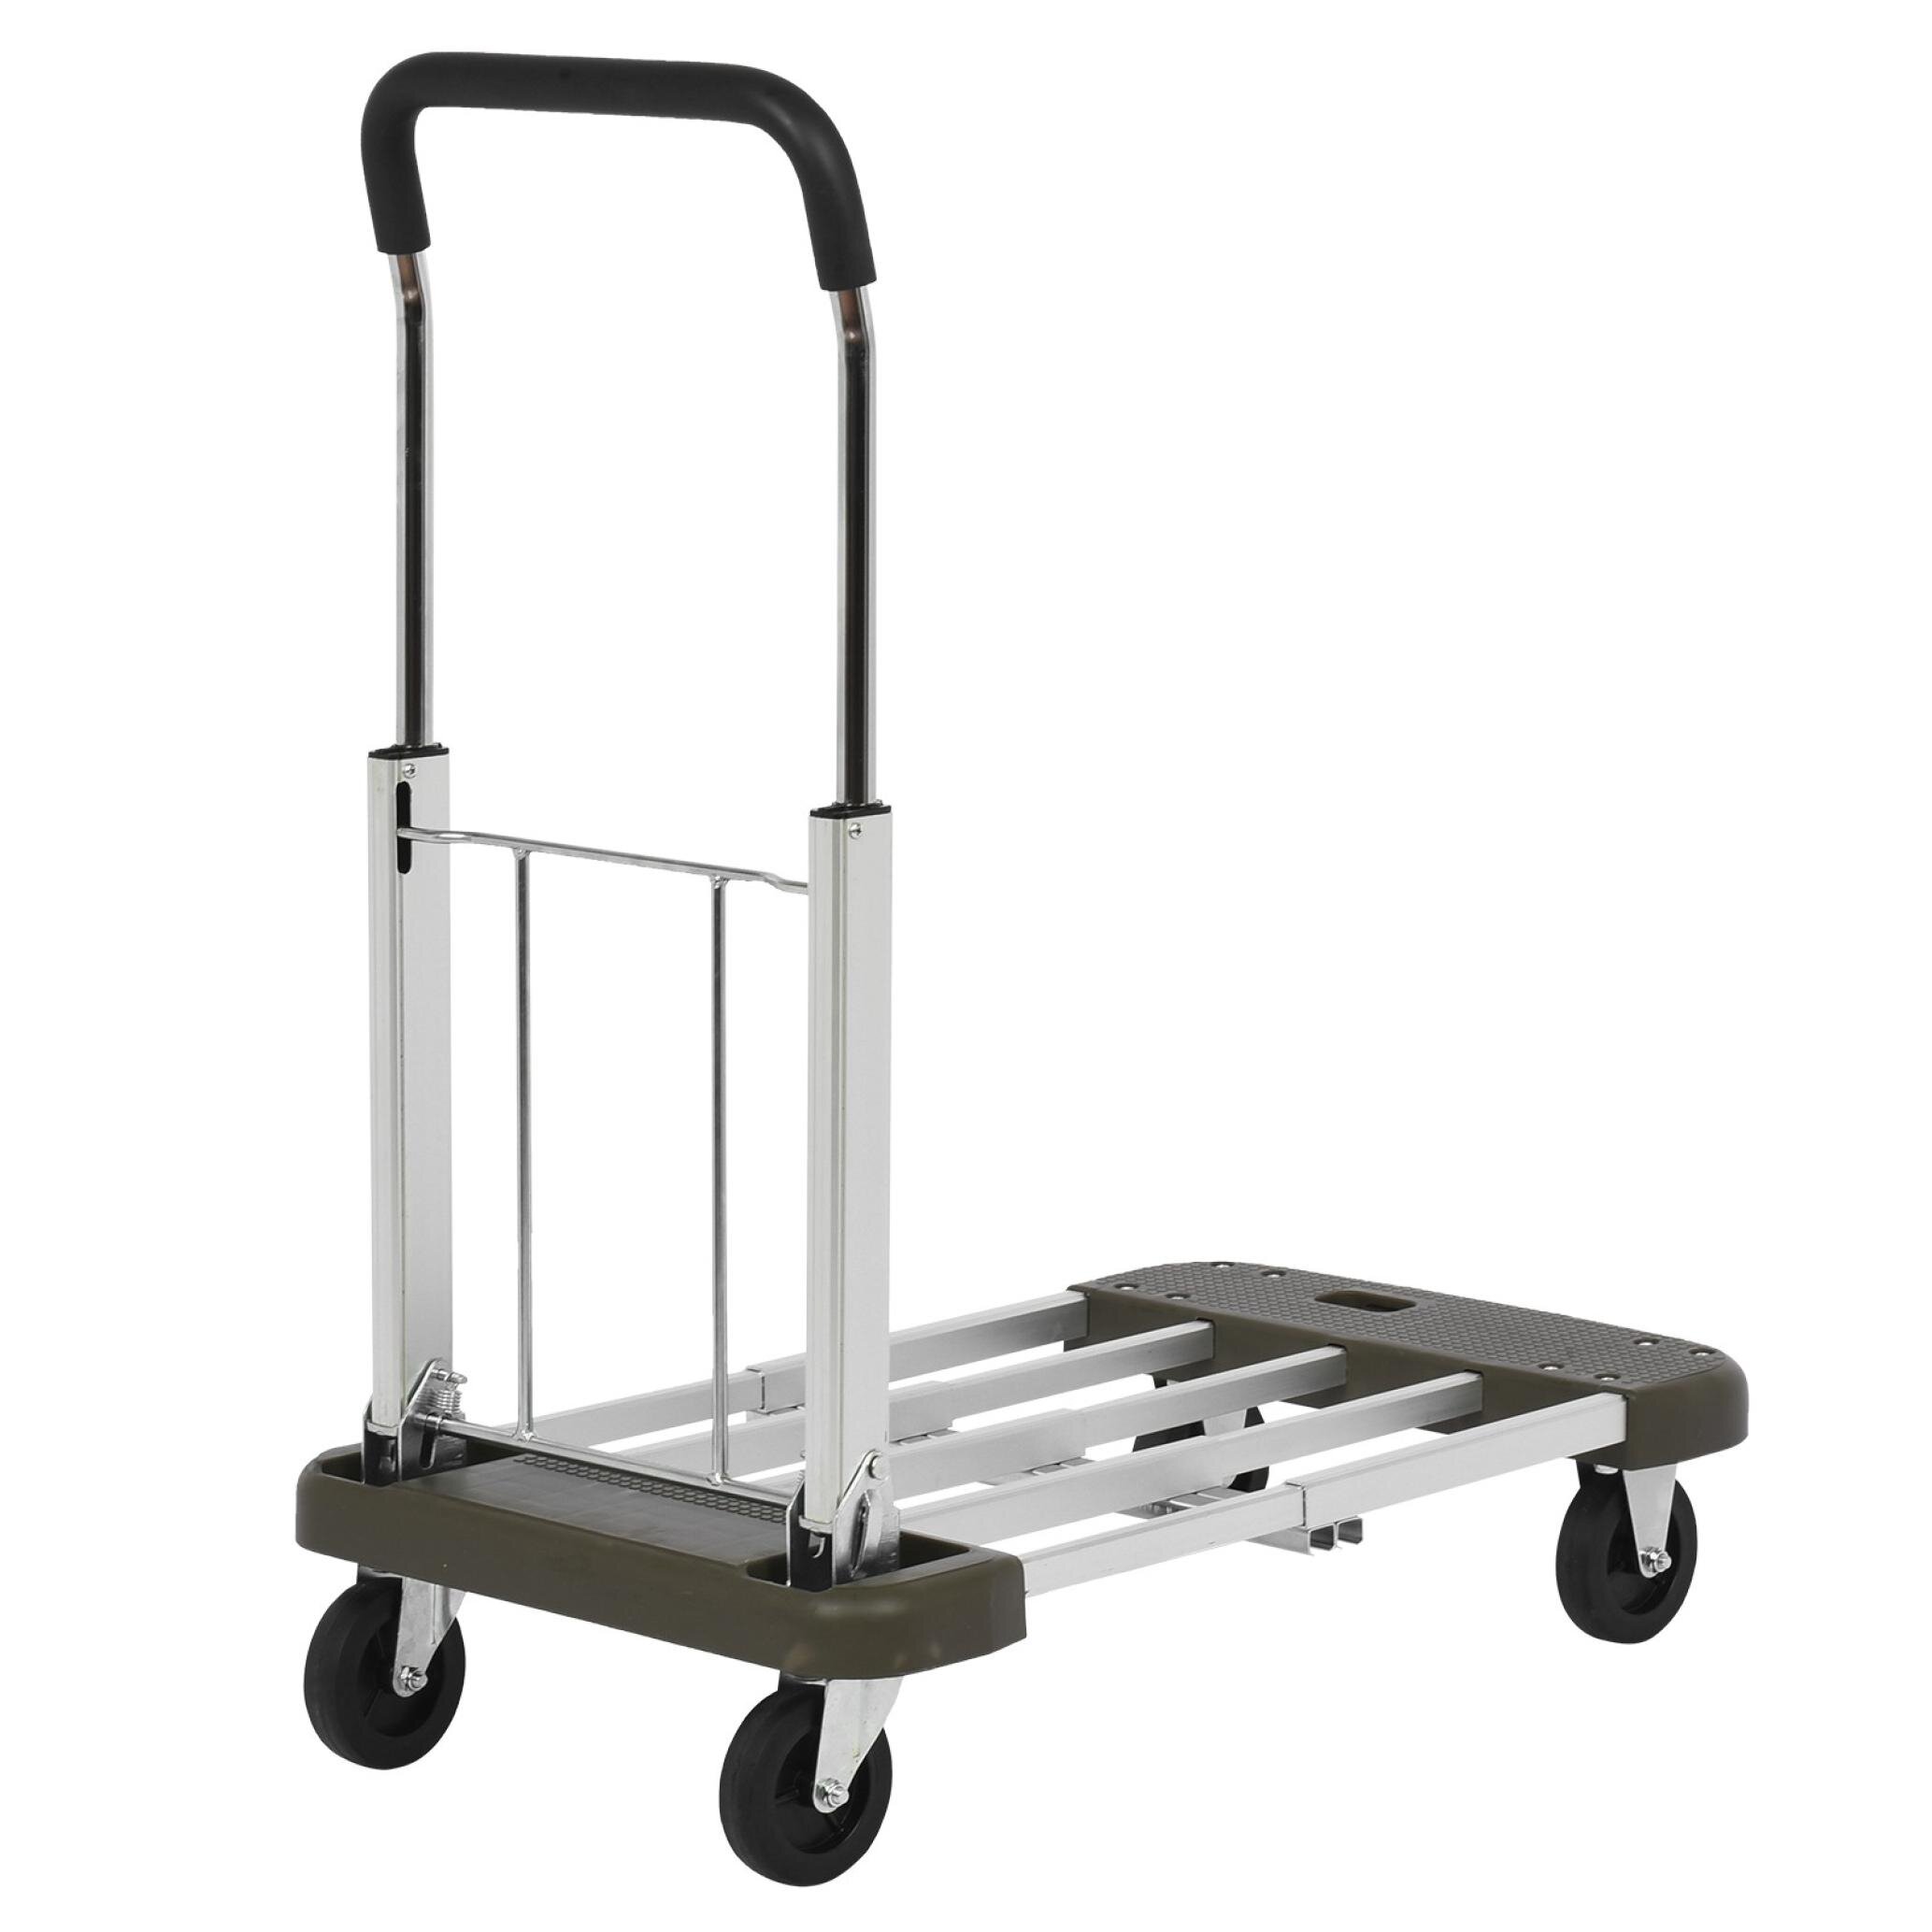 LQQFFGarden Trolley Trolley Four Wheel Mute Trailer Home Collapsible Mini Portable Truck Transport Trolley 